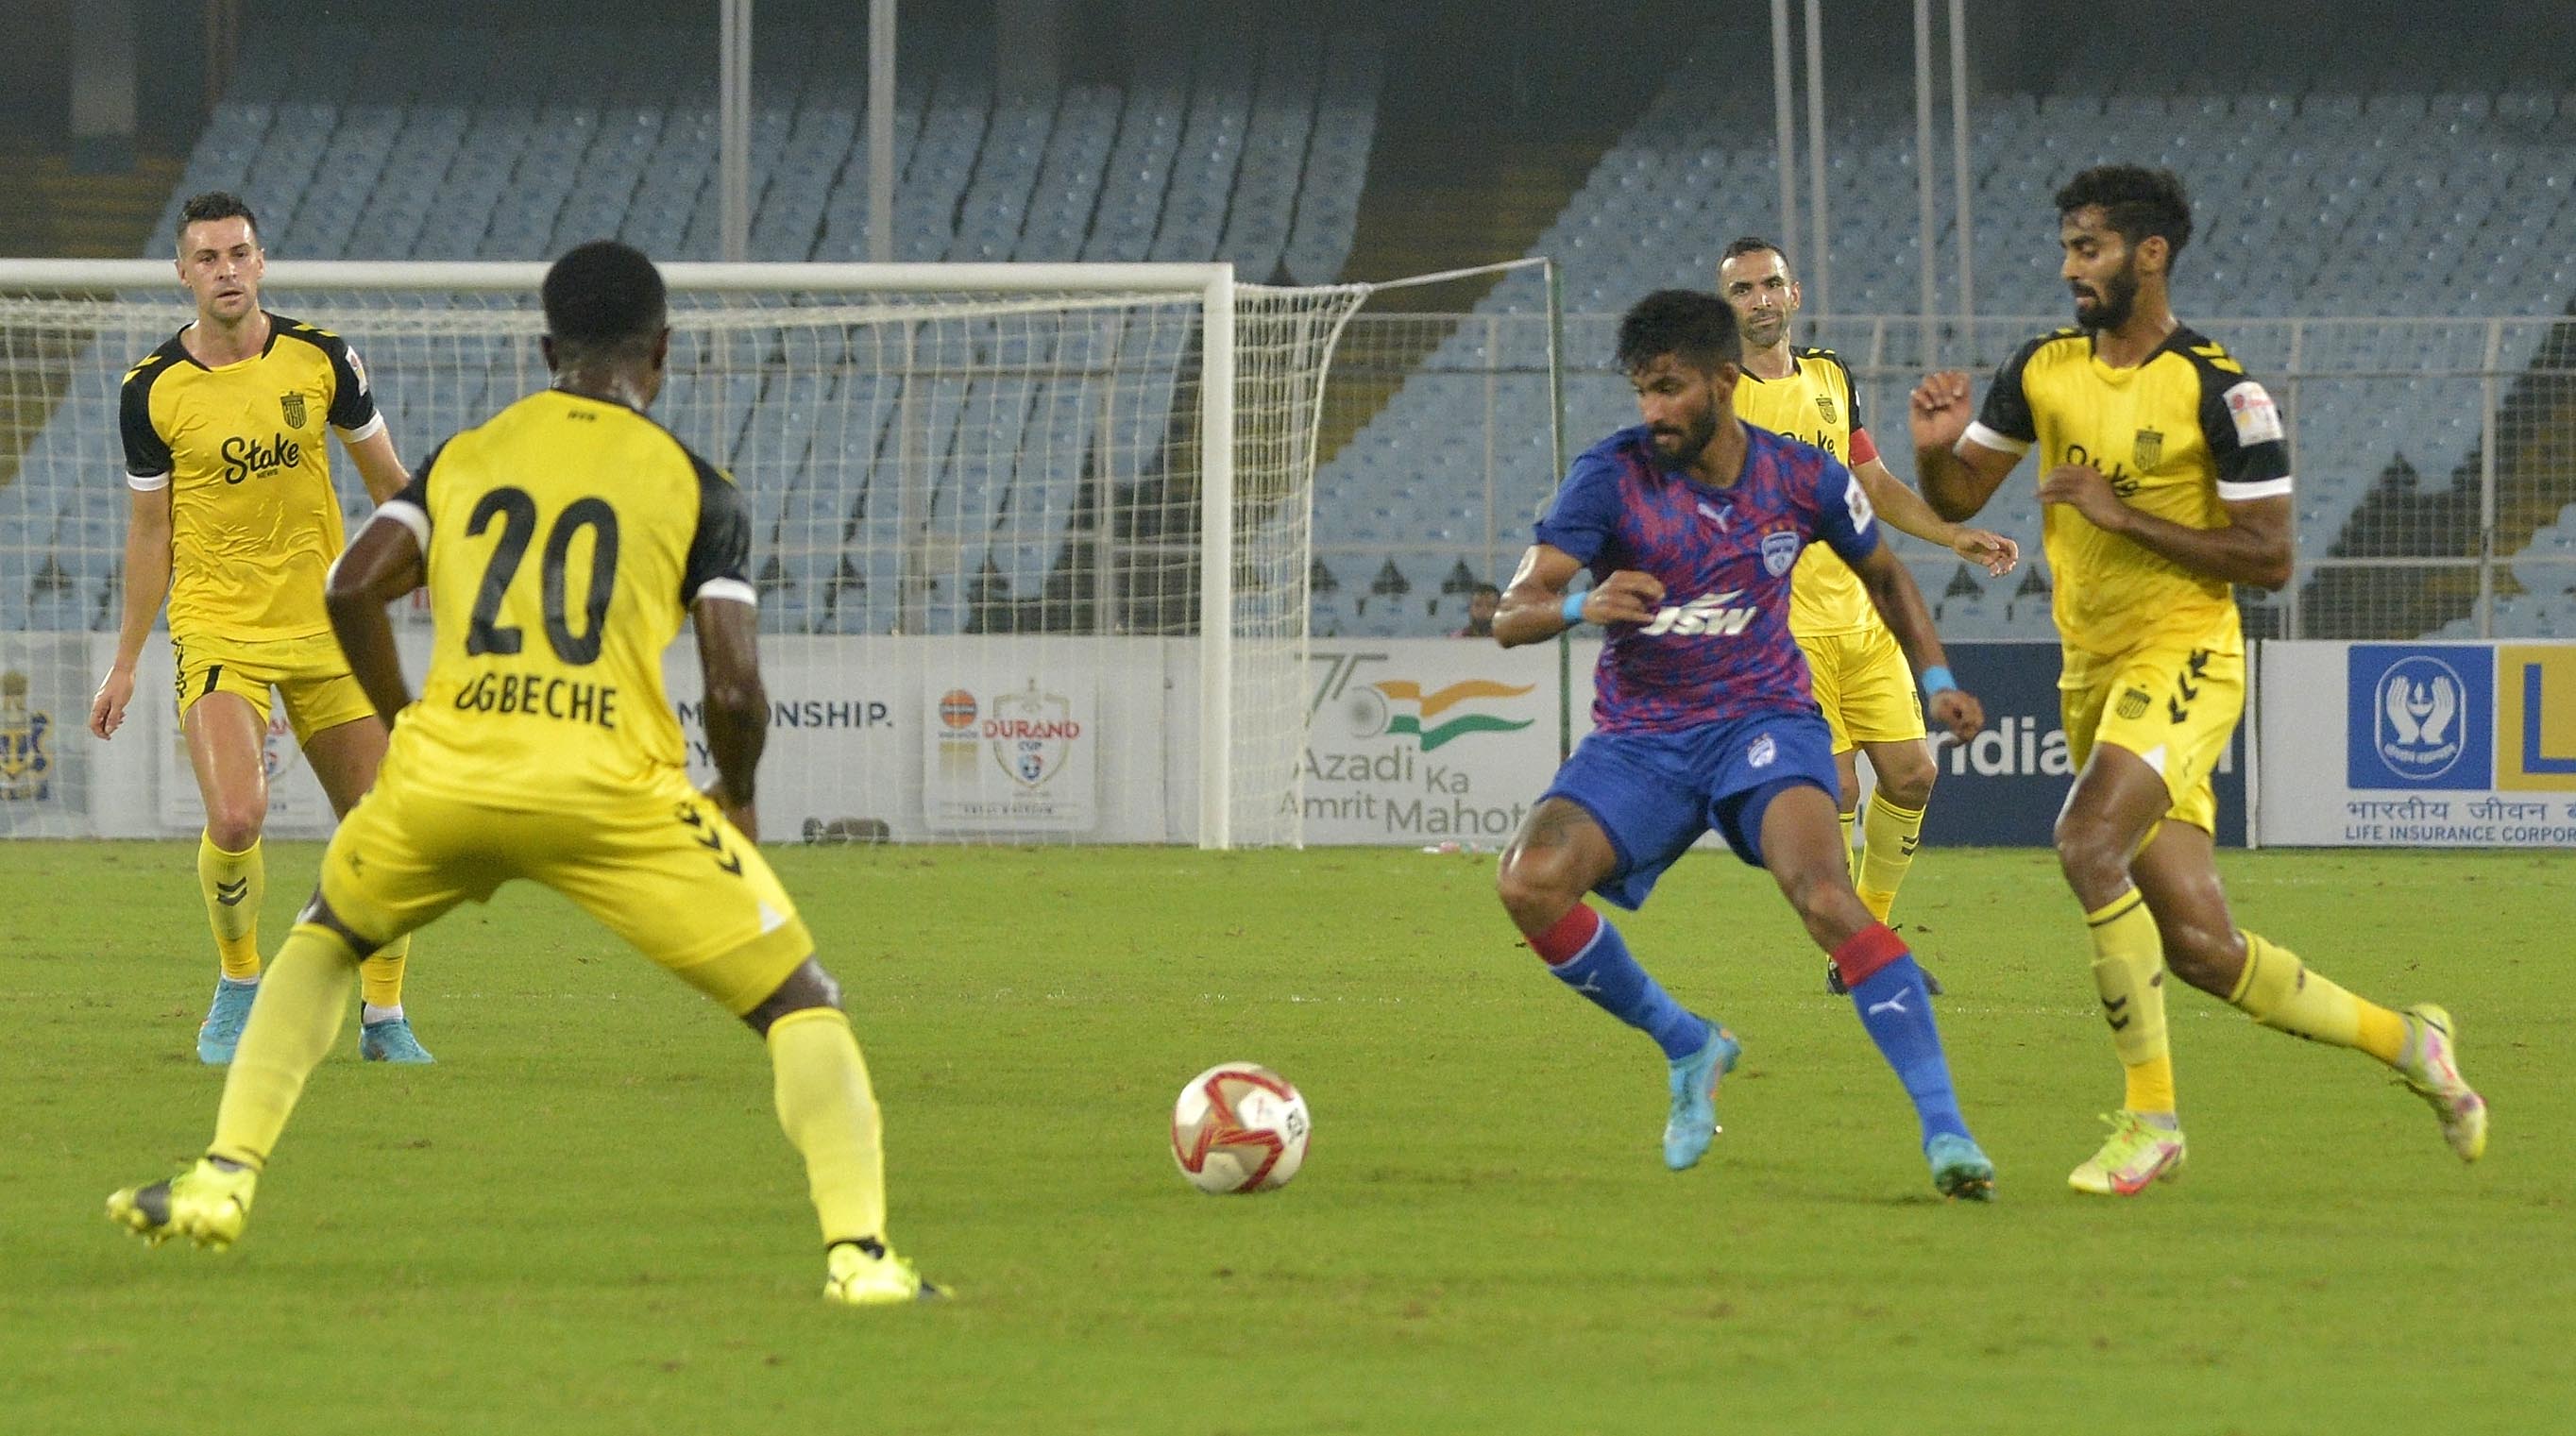 Durand Cup 2022 Finals LIVE: Mumbai City FC SET to take on Bengaluru FC in Durand Cup 2022 Finals -  Follow Durand CUP 2022 LIVE Updates